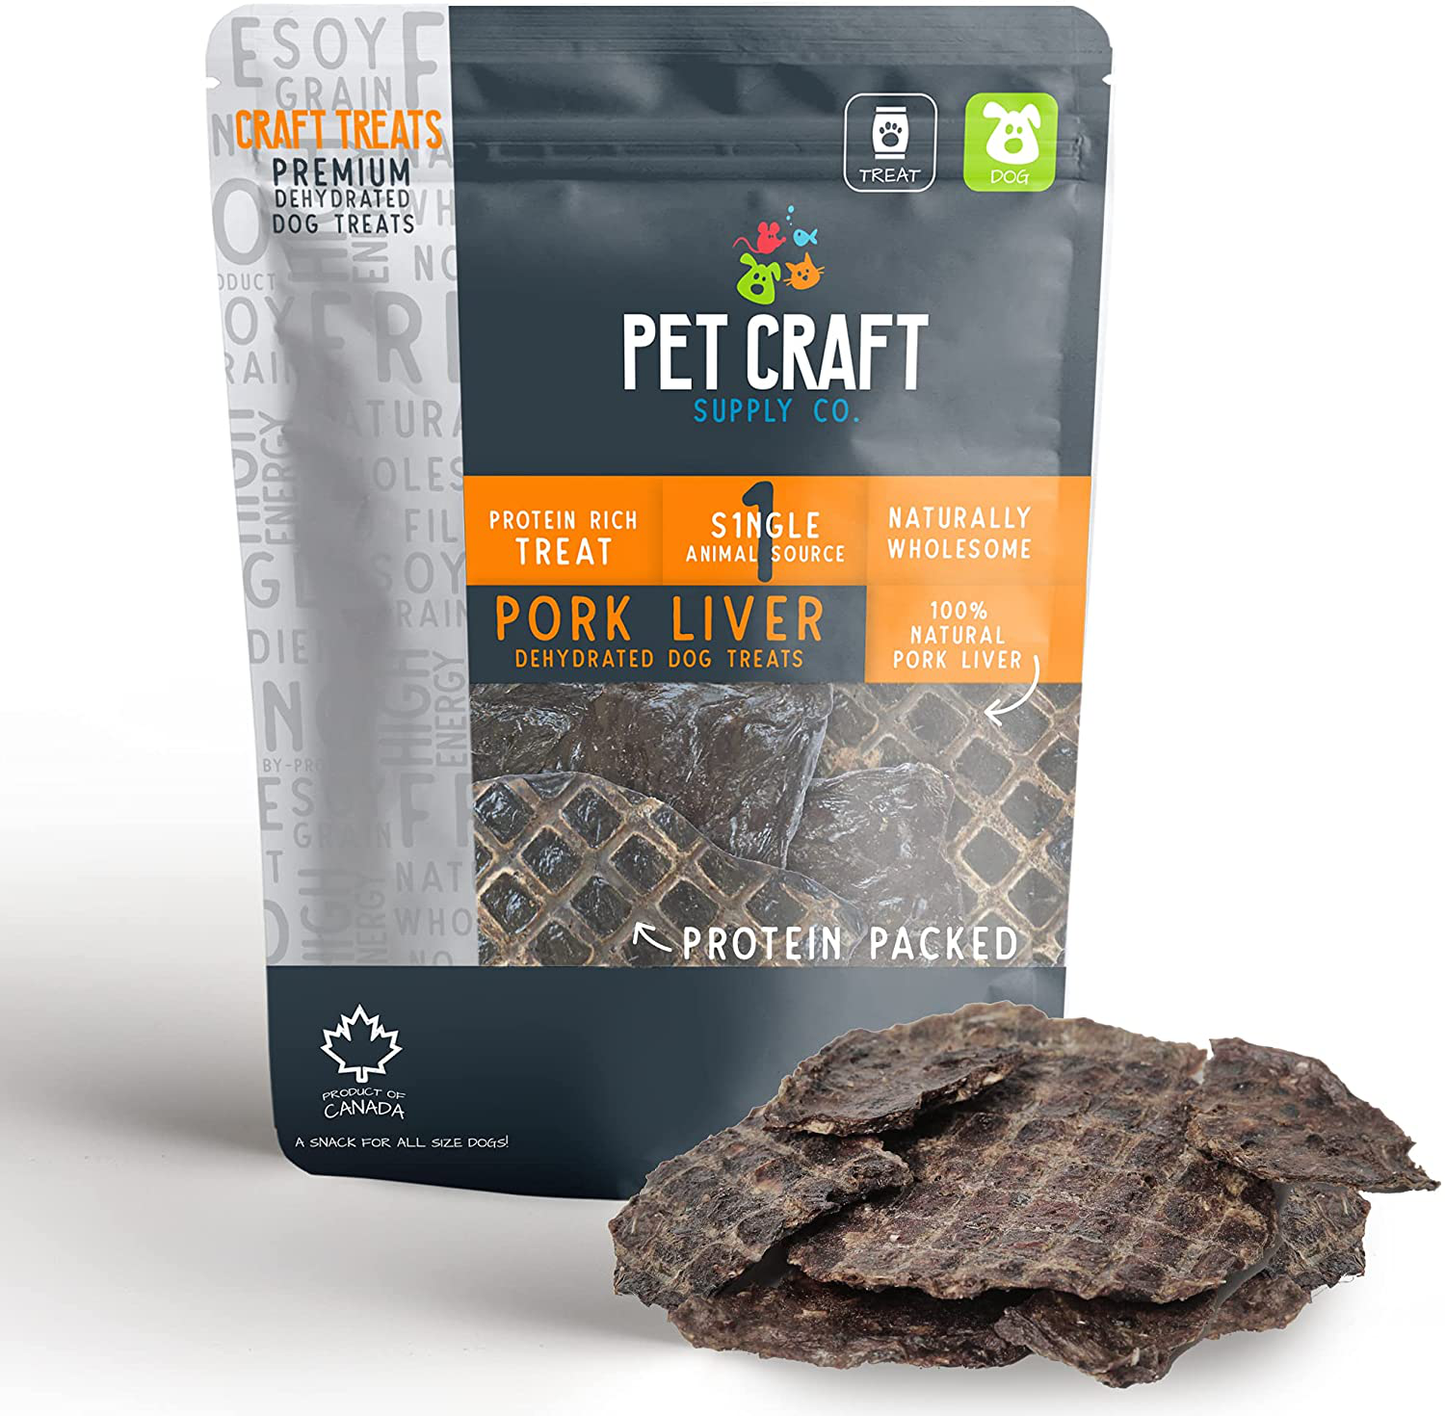 Pet Craft Supply Pure Natural Dried Dog Treats - Salmon Dog Treats - Liver Treats - Training Treats Great for Puppies - Grain Free